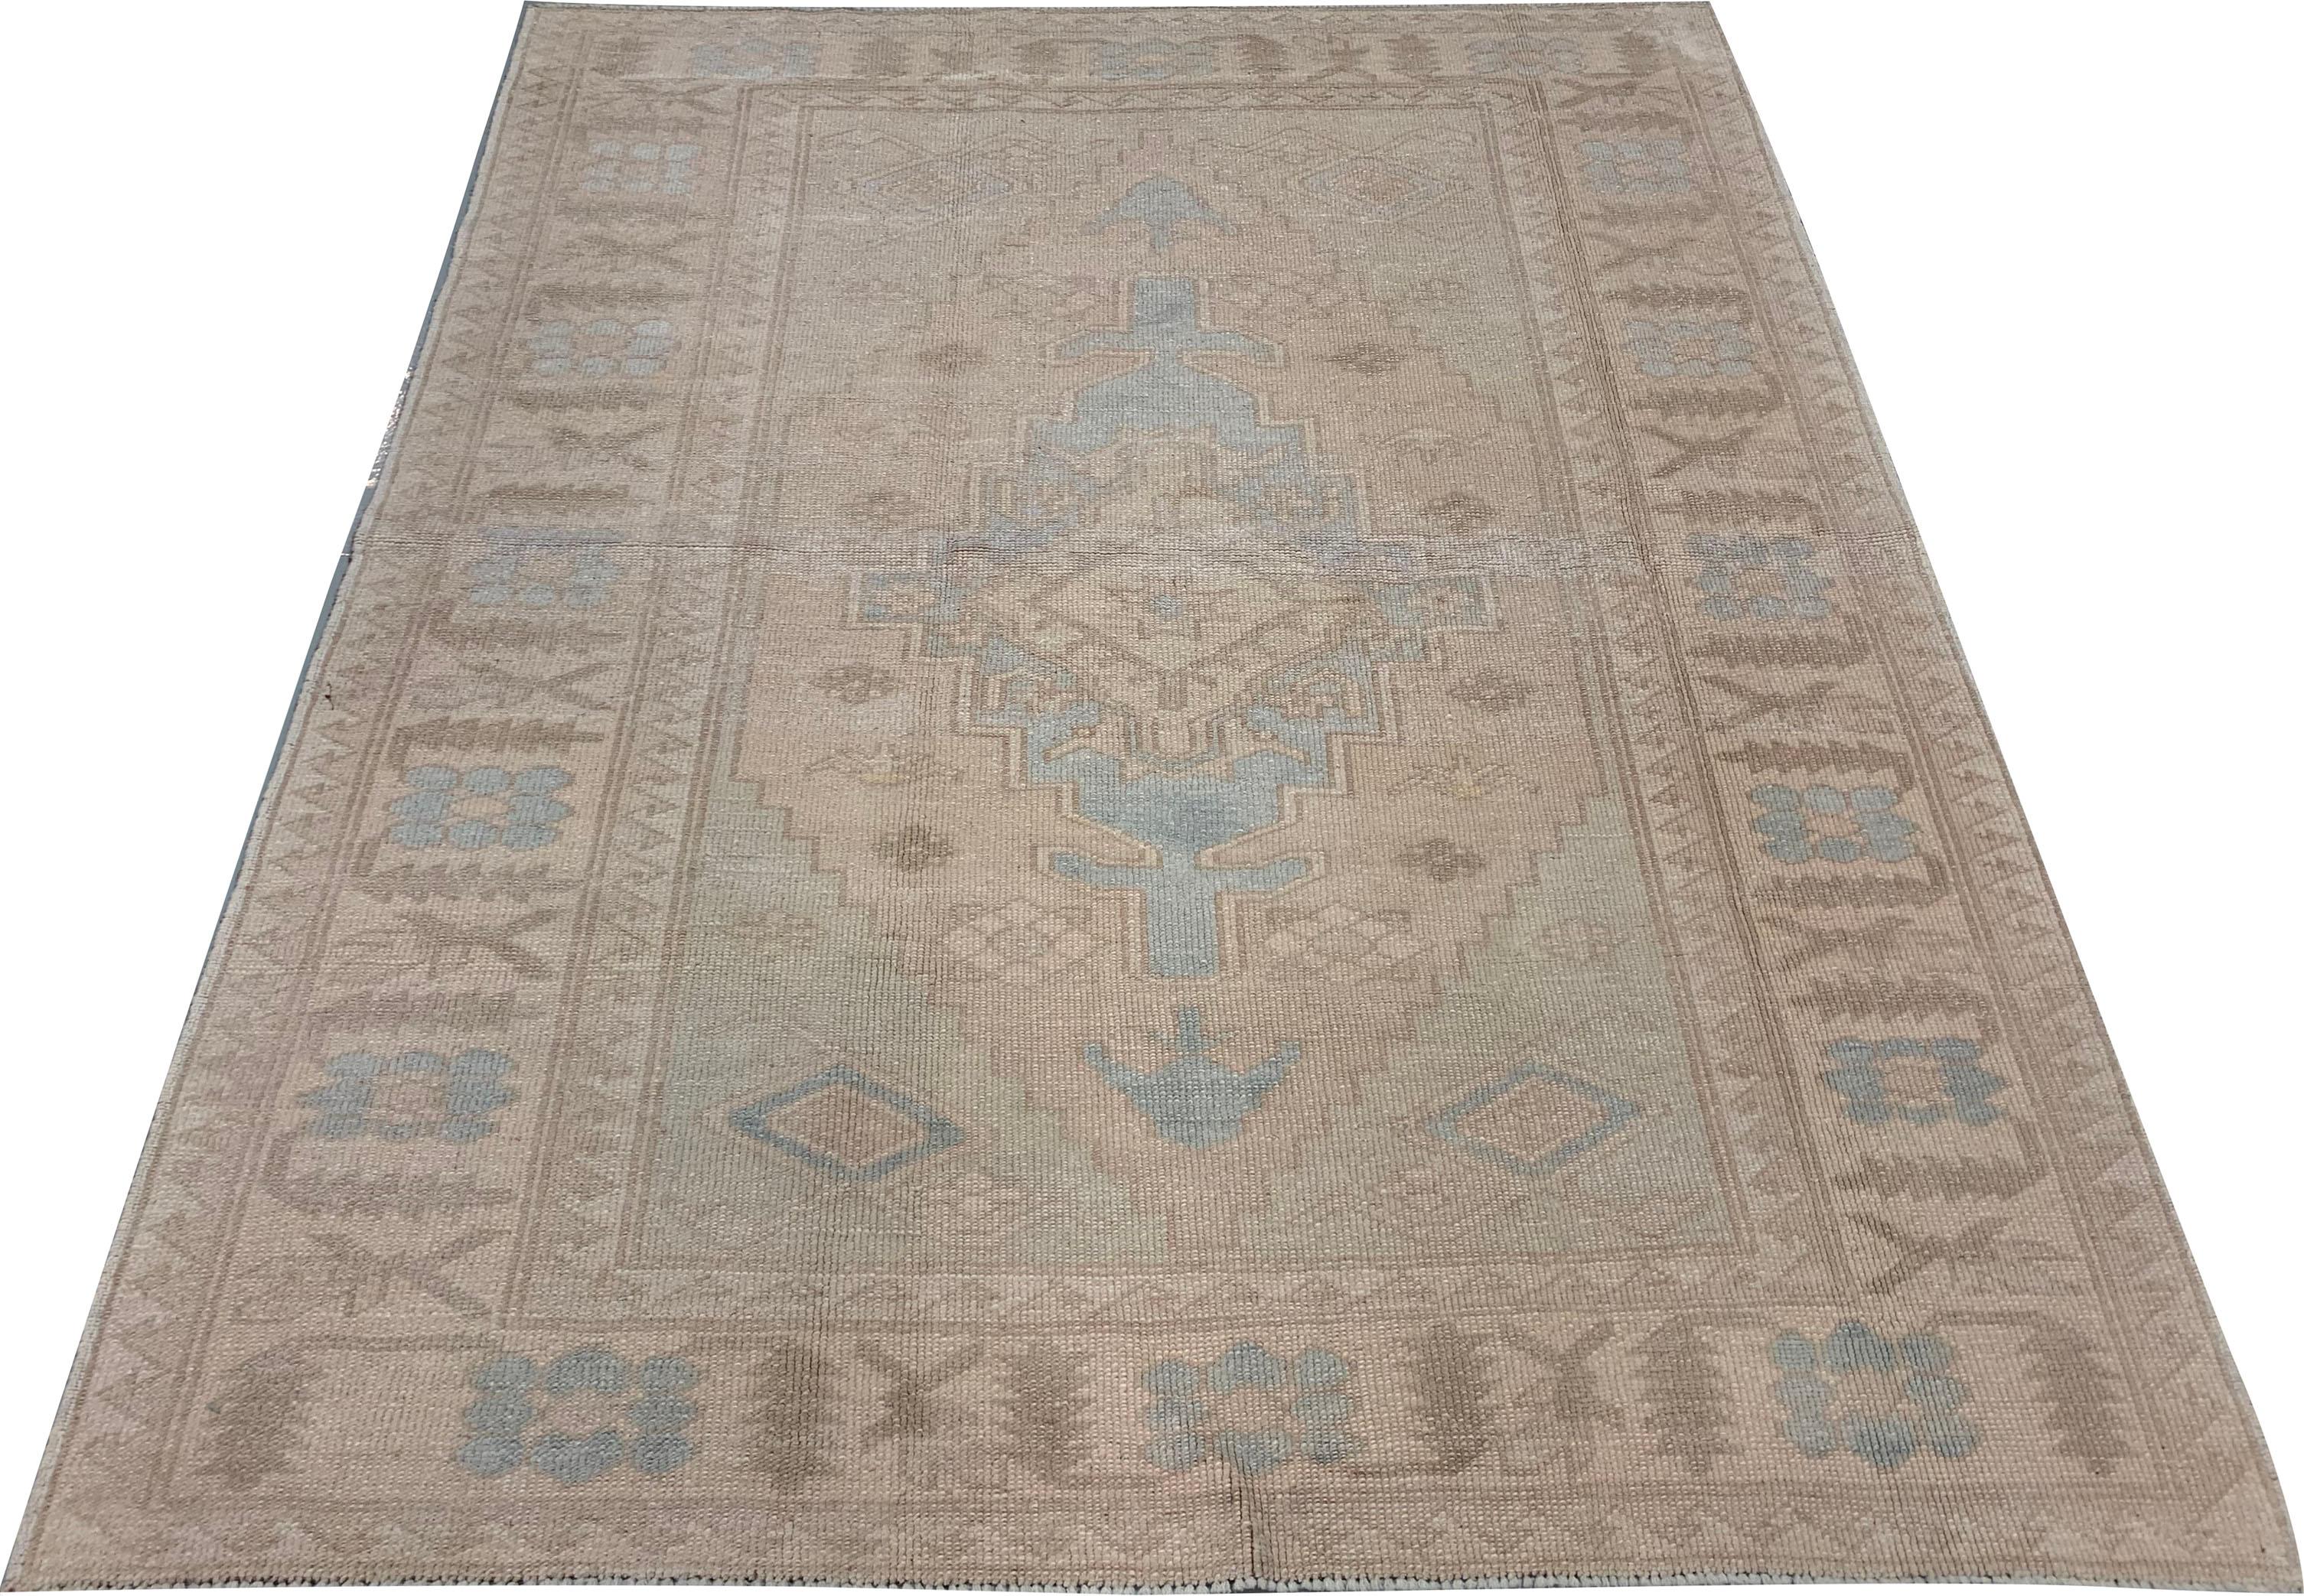 Vintage Turkish Oushak area rug, 4'3 x 5'3. Oushak's are known for their soft palettes combined with eccentric drawing. Oushak in western Turkey has the longest continuous rug weaving history, stretching back at least to the mid-fifteenth century.